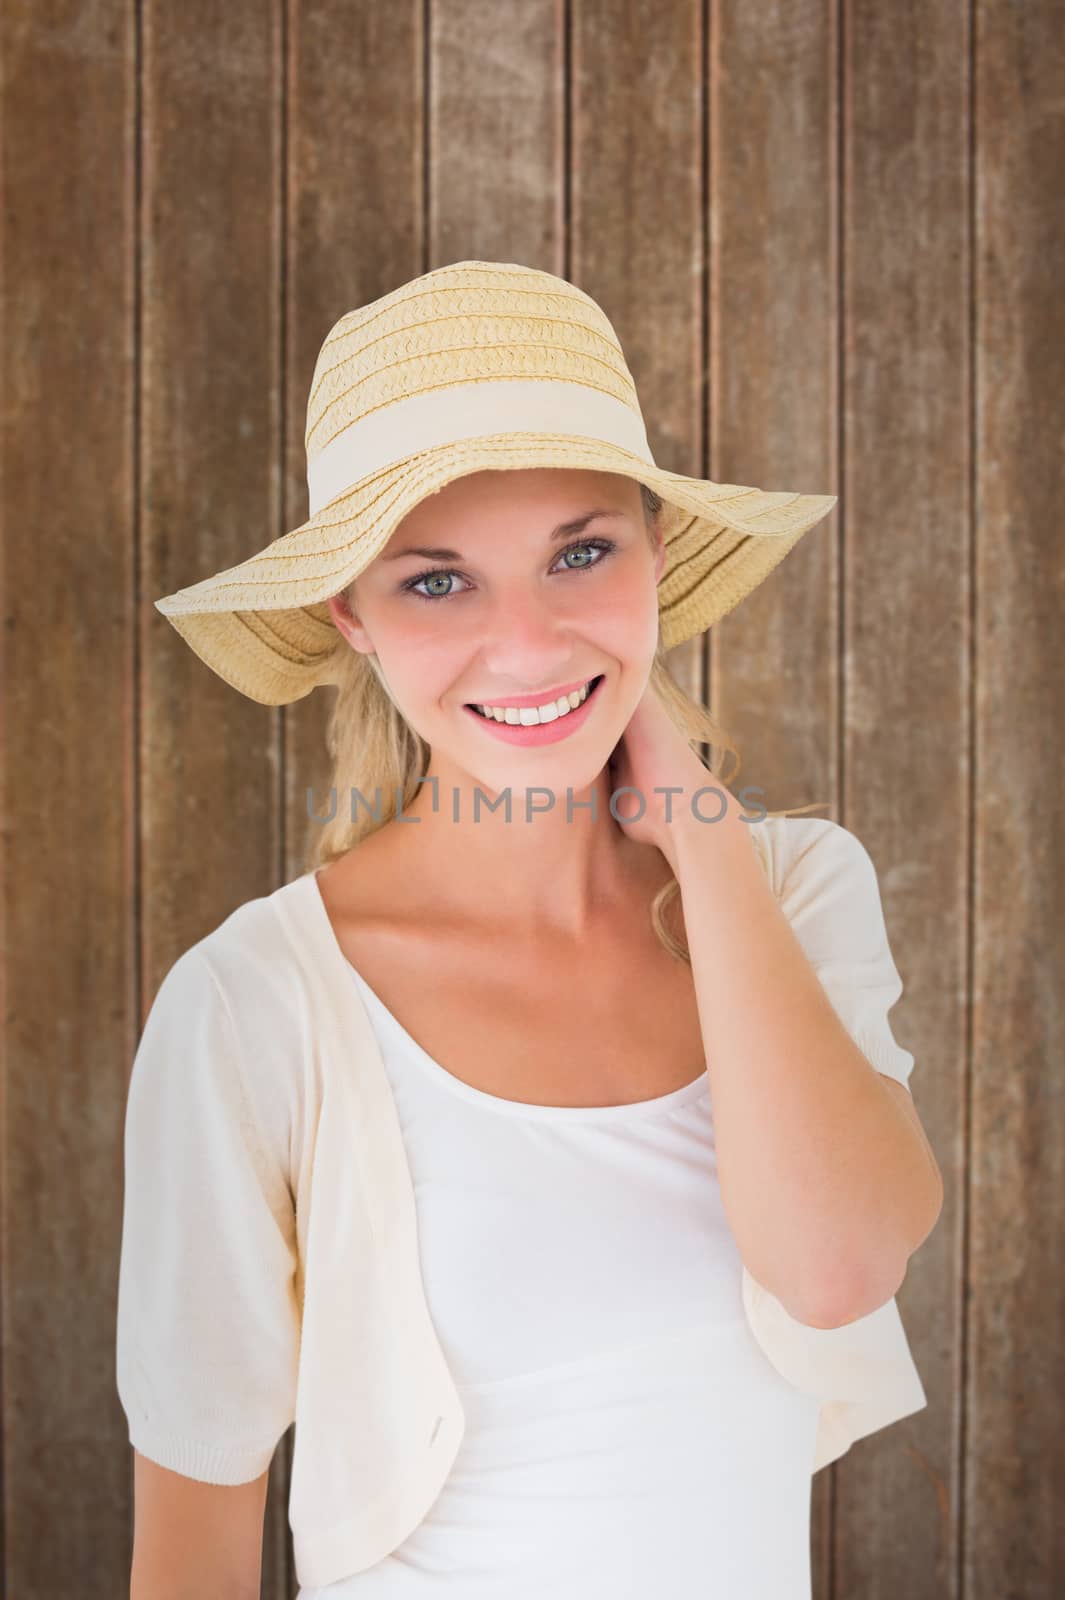 Attractive young blonde smiling at camera in sunhat against wooden planks background